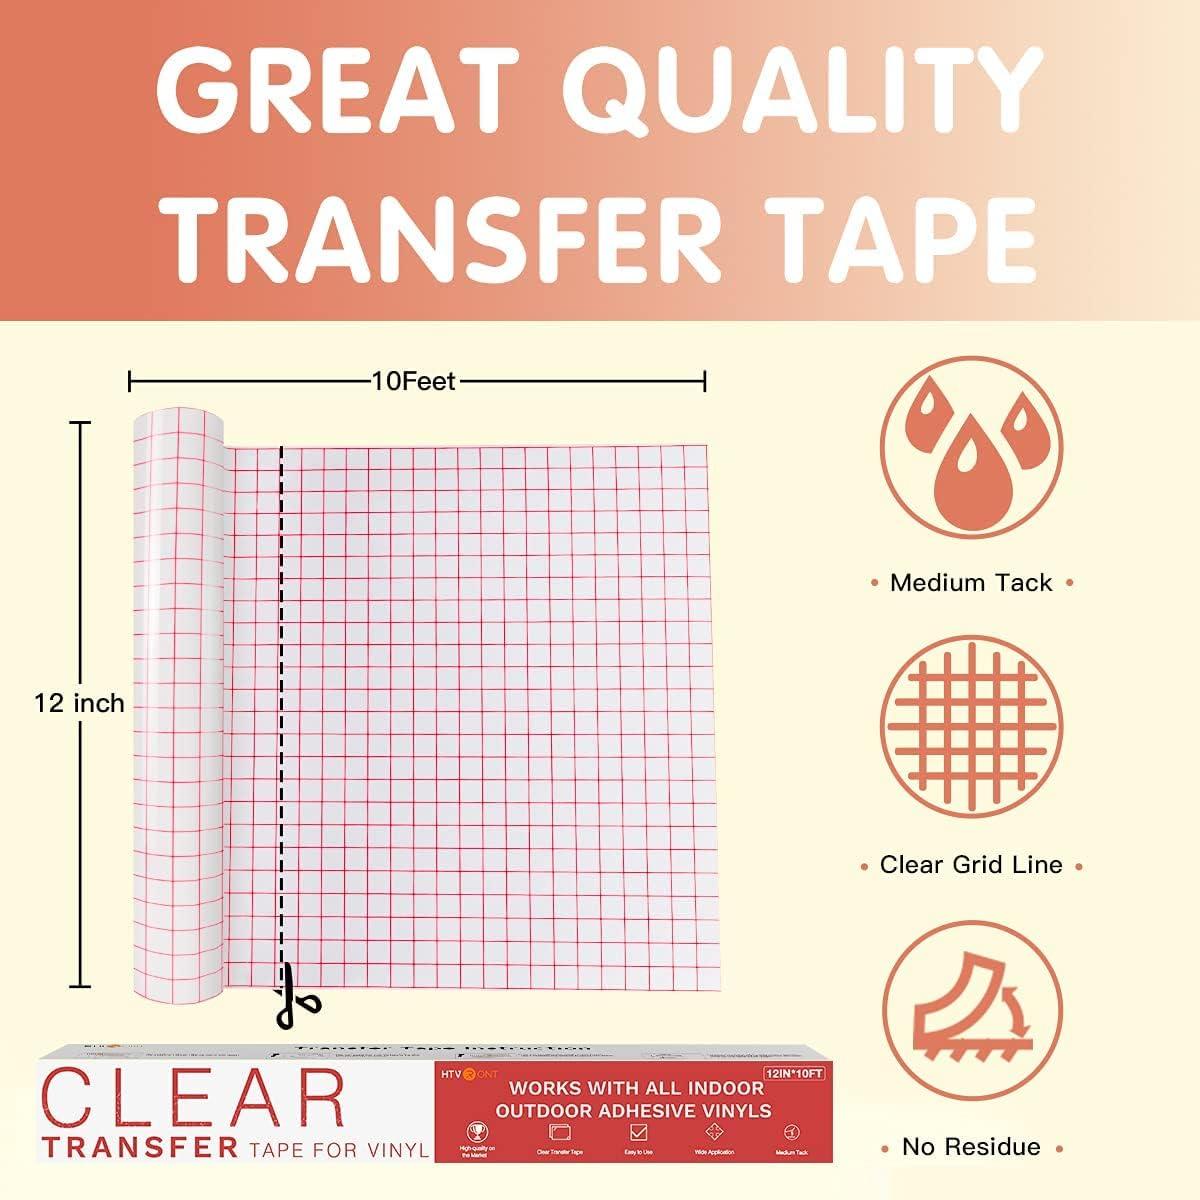 Transfer Tape for Vinyl - 12 x 10 FT w/Red Alignment Grid Clear Transfer  Paper for Adhesive Vinyl - Medium Tack Vinyl Transfer Tape for for Decals  Signs Windows Stickers A-12x10FT